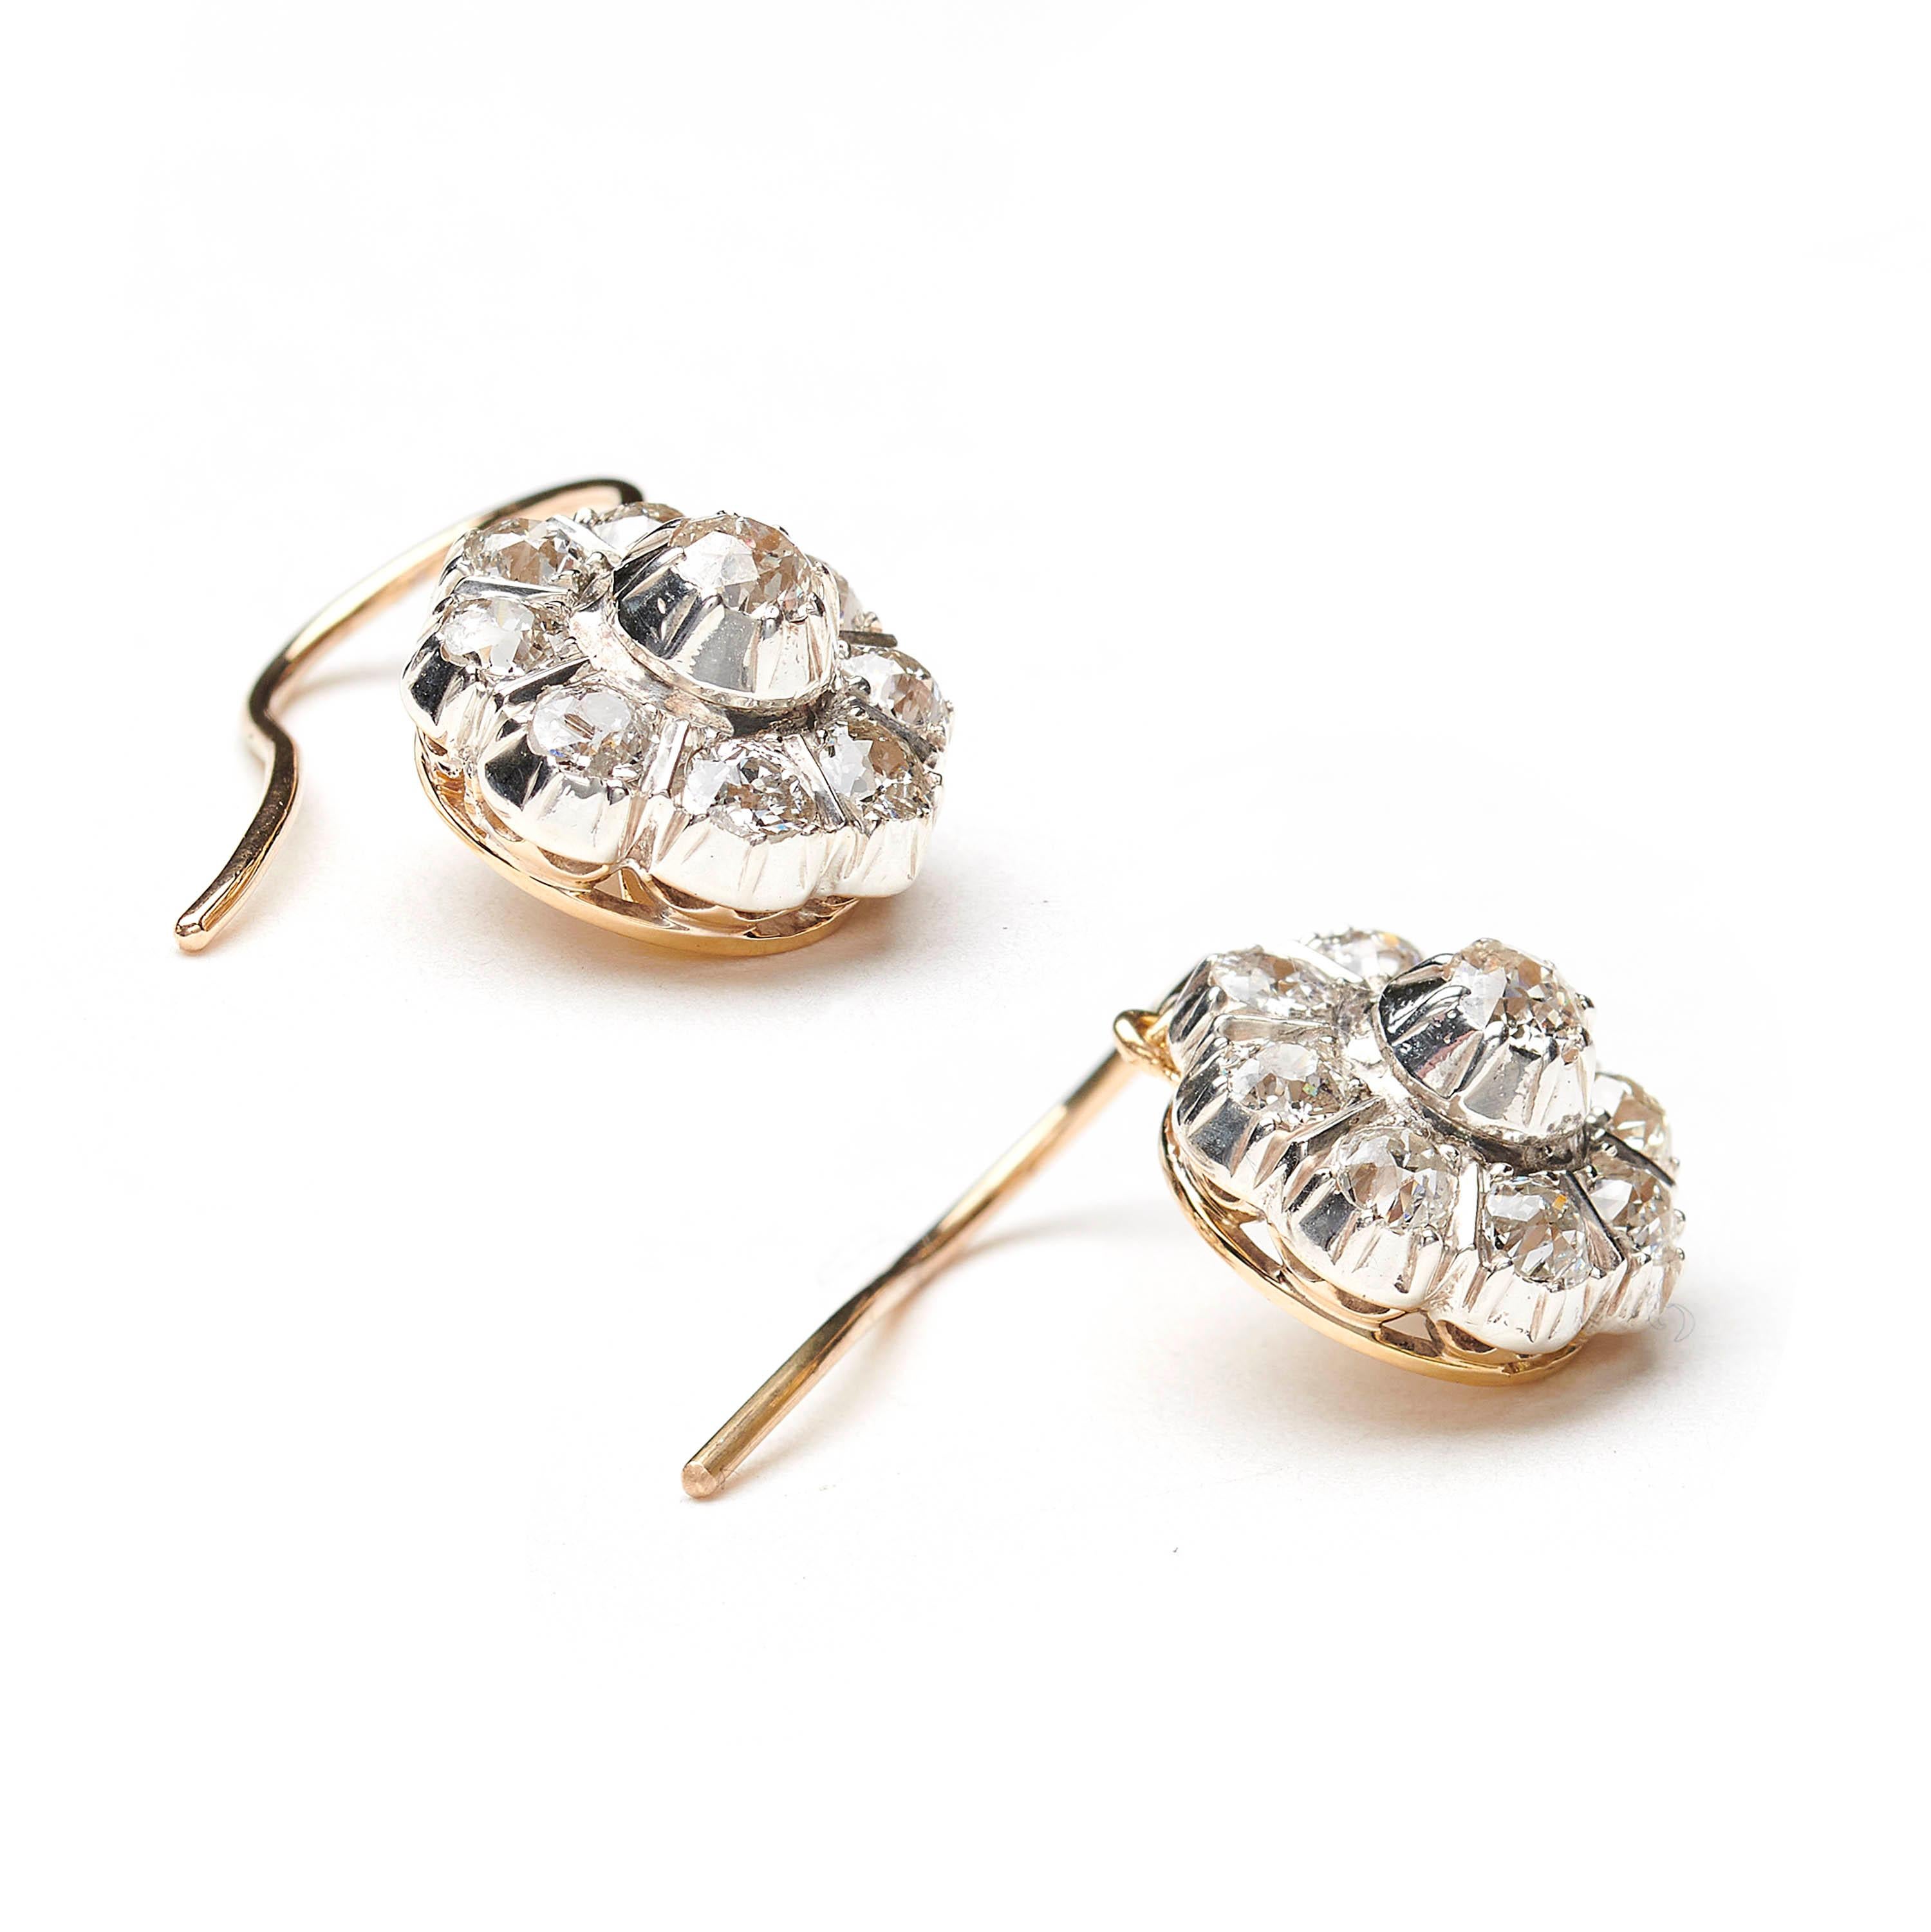 A pair of diamond drop earrings, with antique old-cut diamond clusters, with cut-down settings, mounted in silver-upon-gold, circa 1880, with new gold hook fittings, with an estimated total diamond weight of 1.60ct. In our opinion the colour is H to